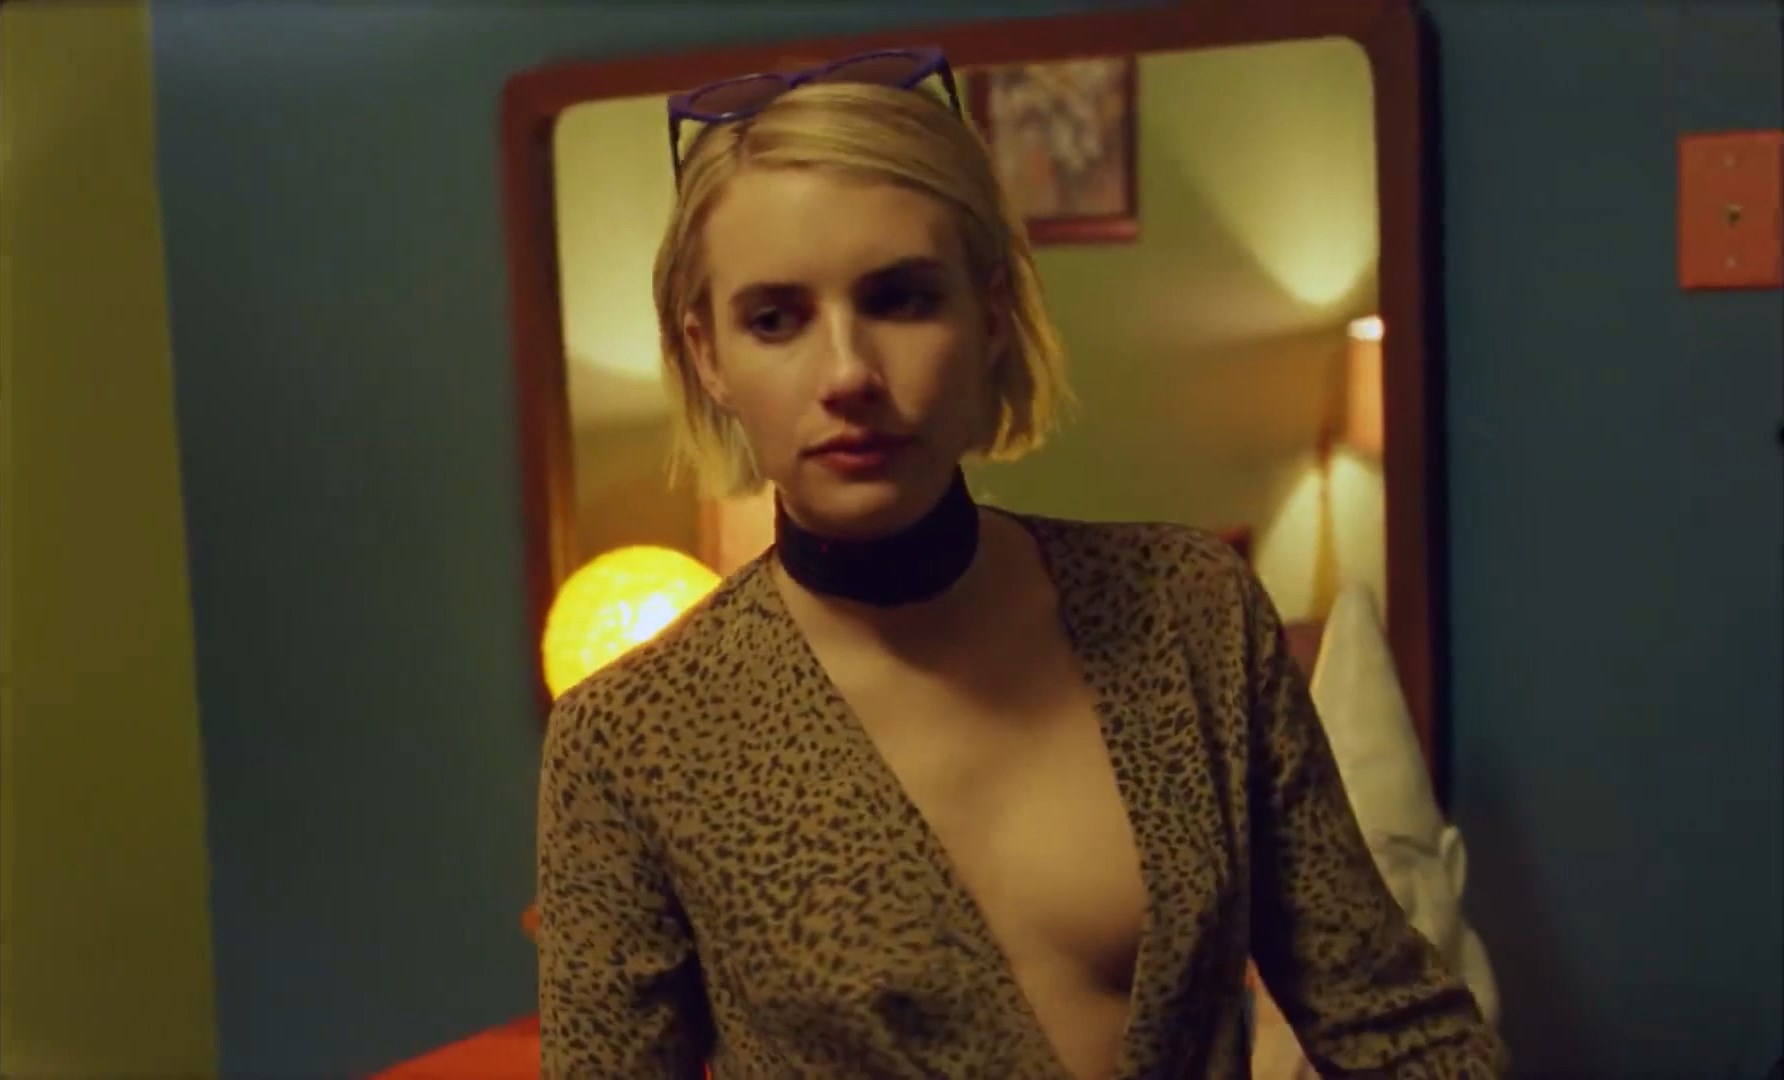 Real Emma Roberts Porn - Watch Online - Emma Roberts - Time of Day (2018) HD 1080p